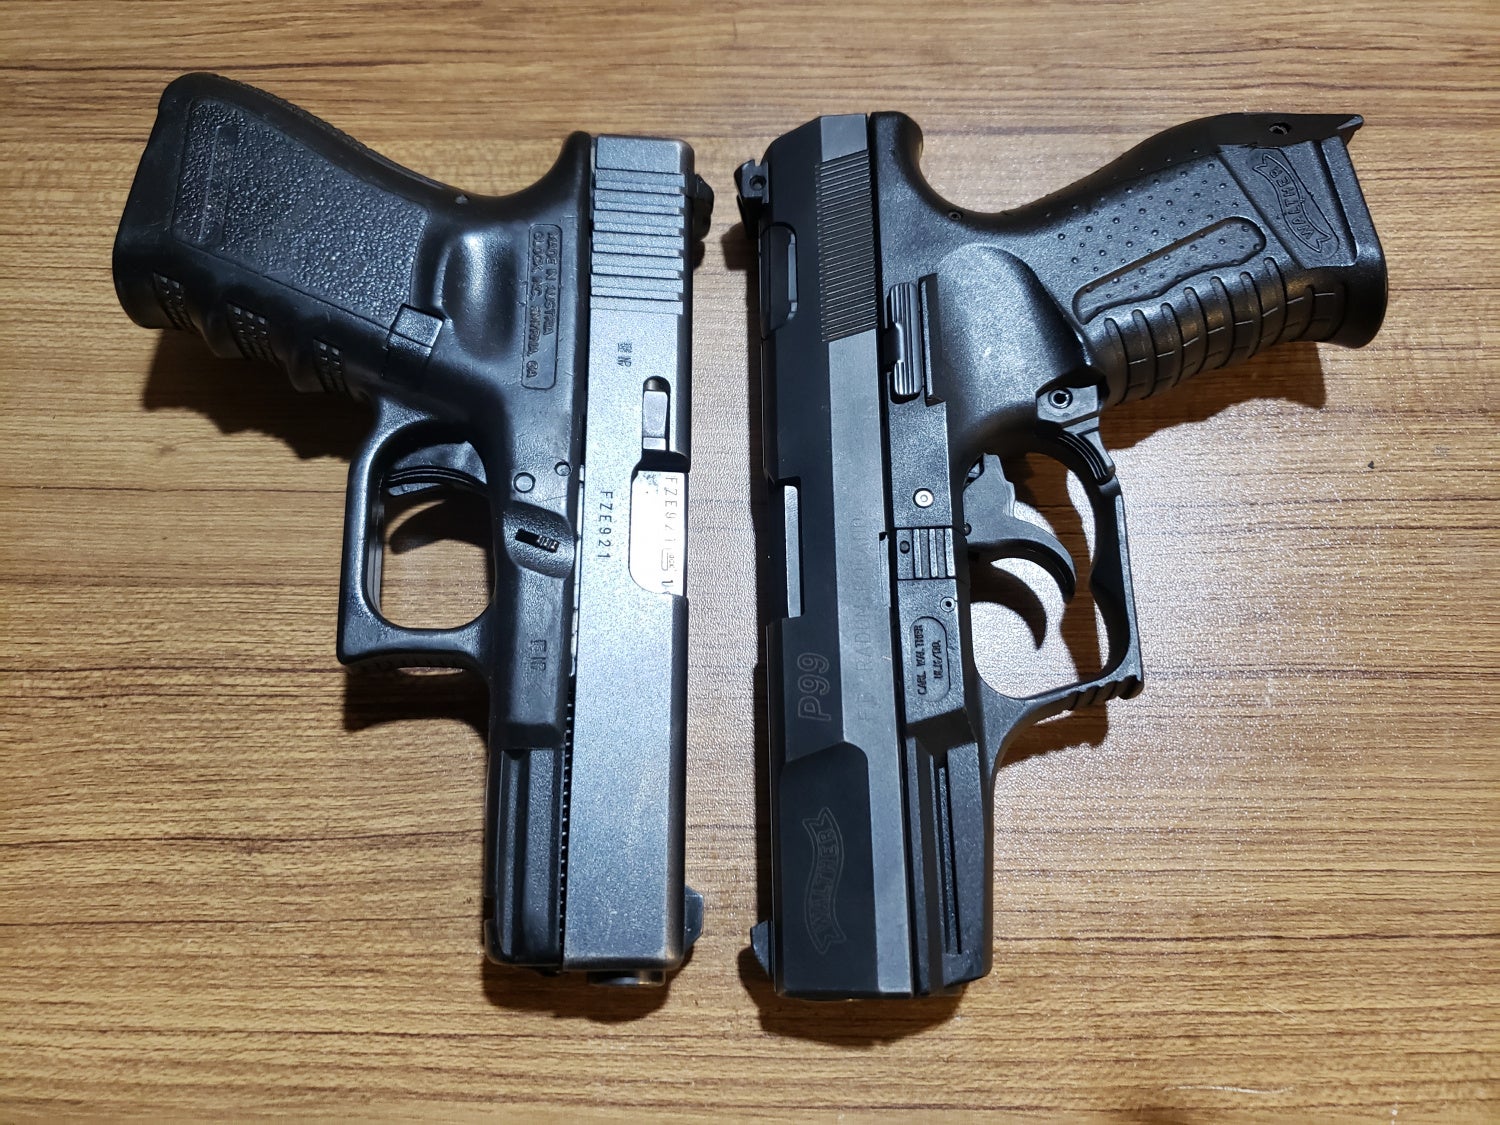 First generation P99 and third generation Glock 19.